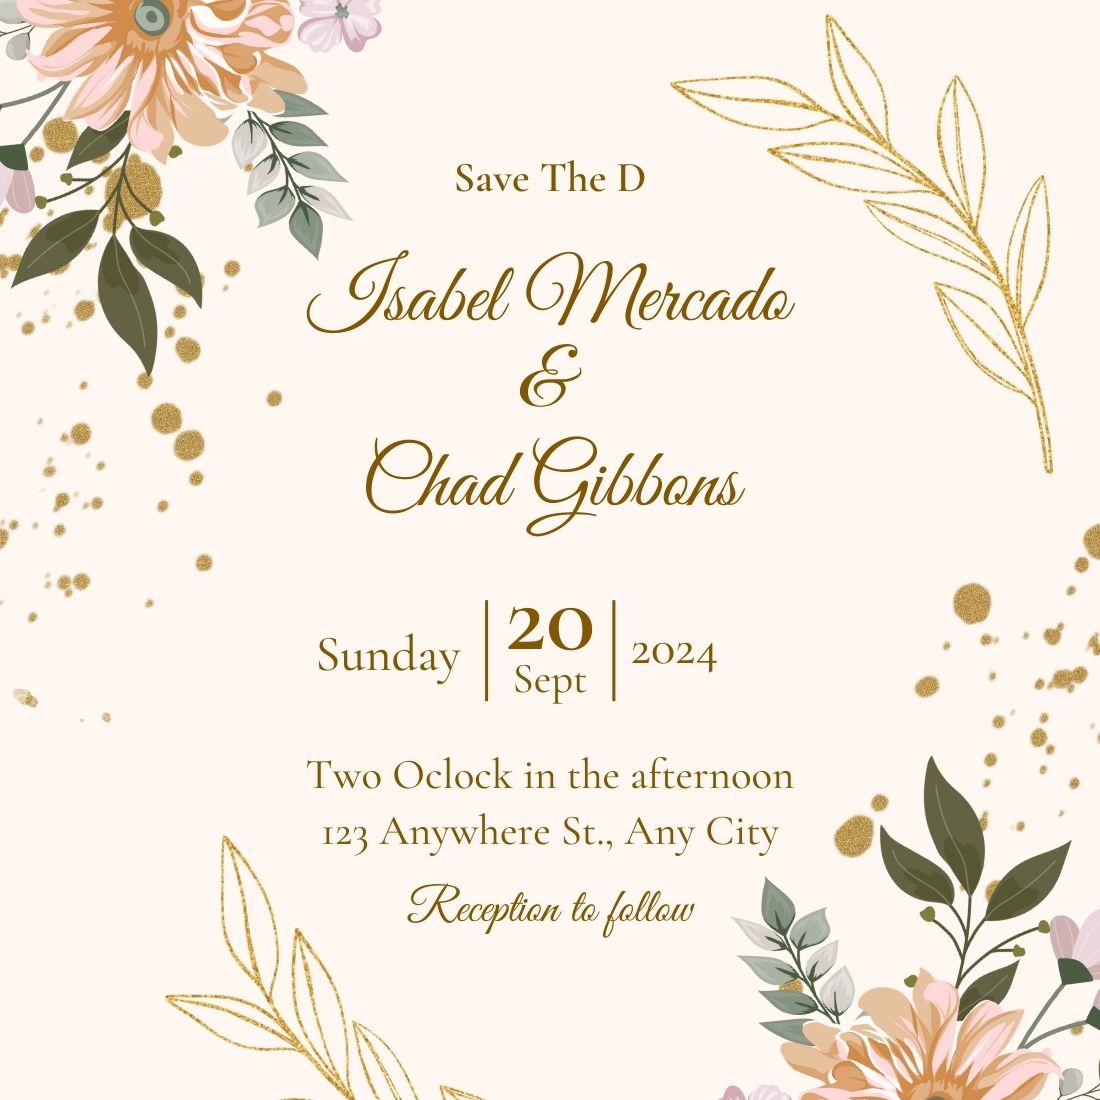 beige and gold floral wedding invitation 1100 × 1100 px 66